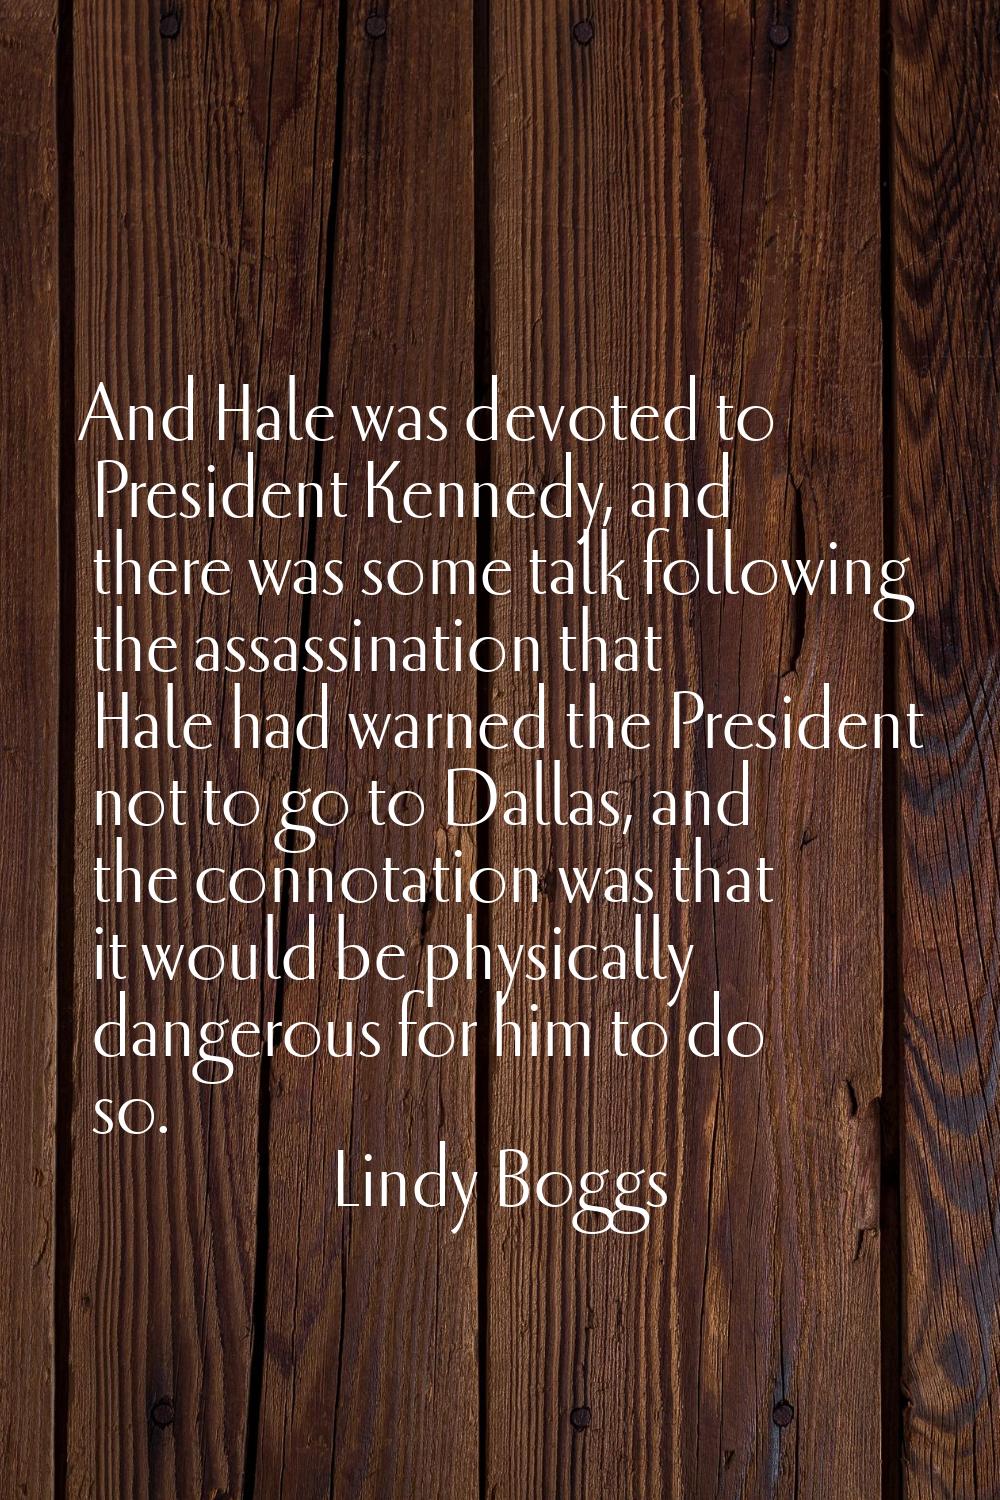 And Hale was devoted to President Kennedy, and there was some talk following the assassination that